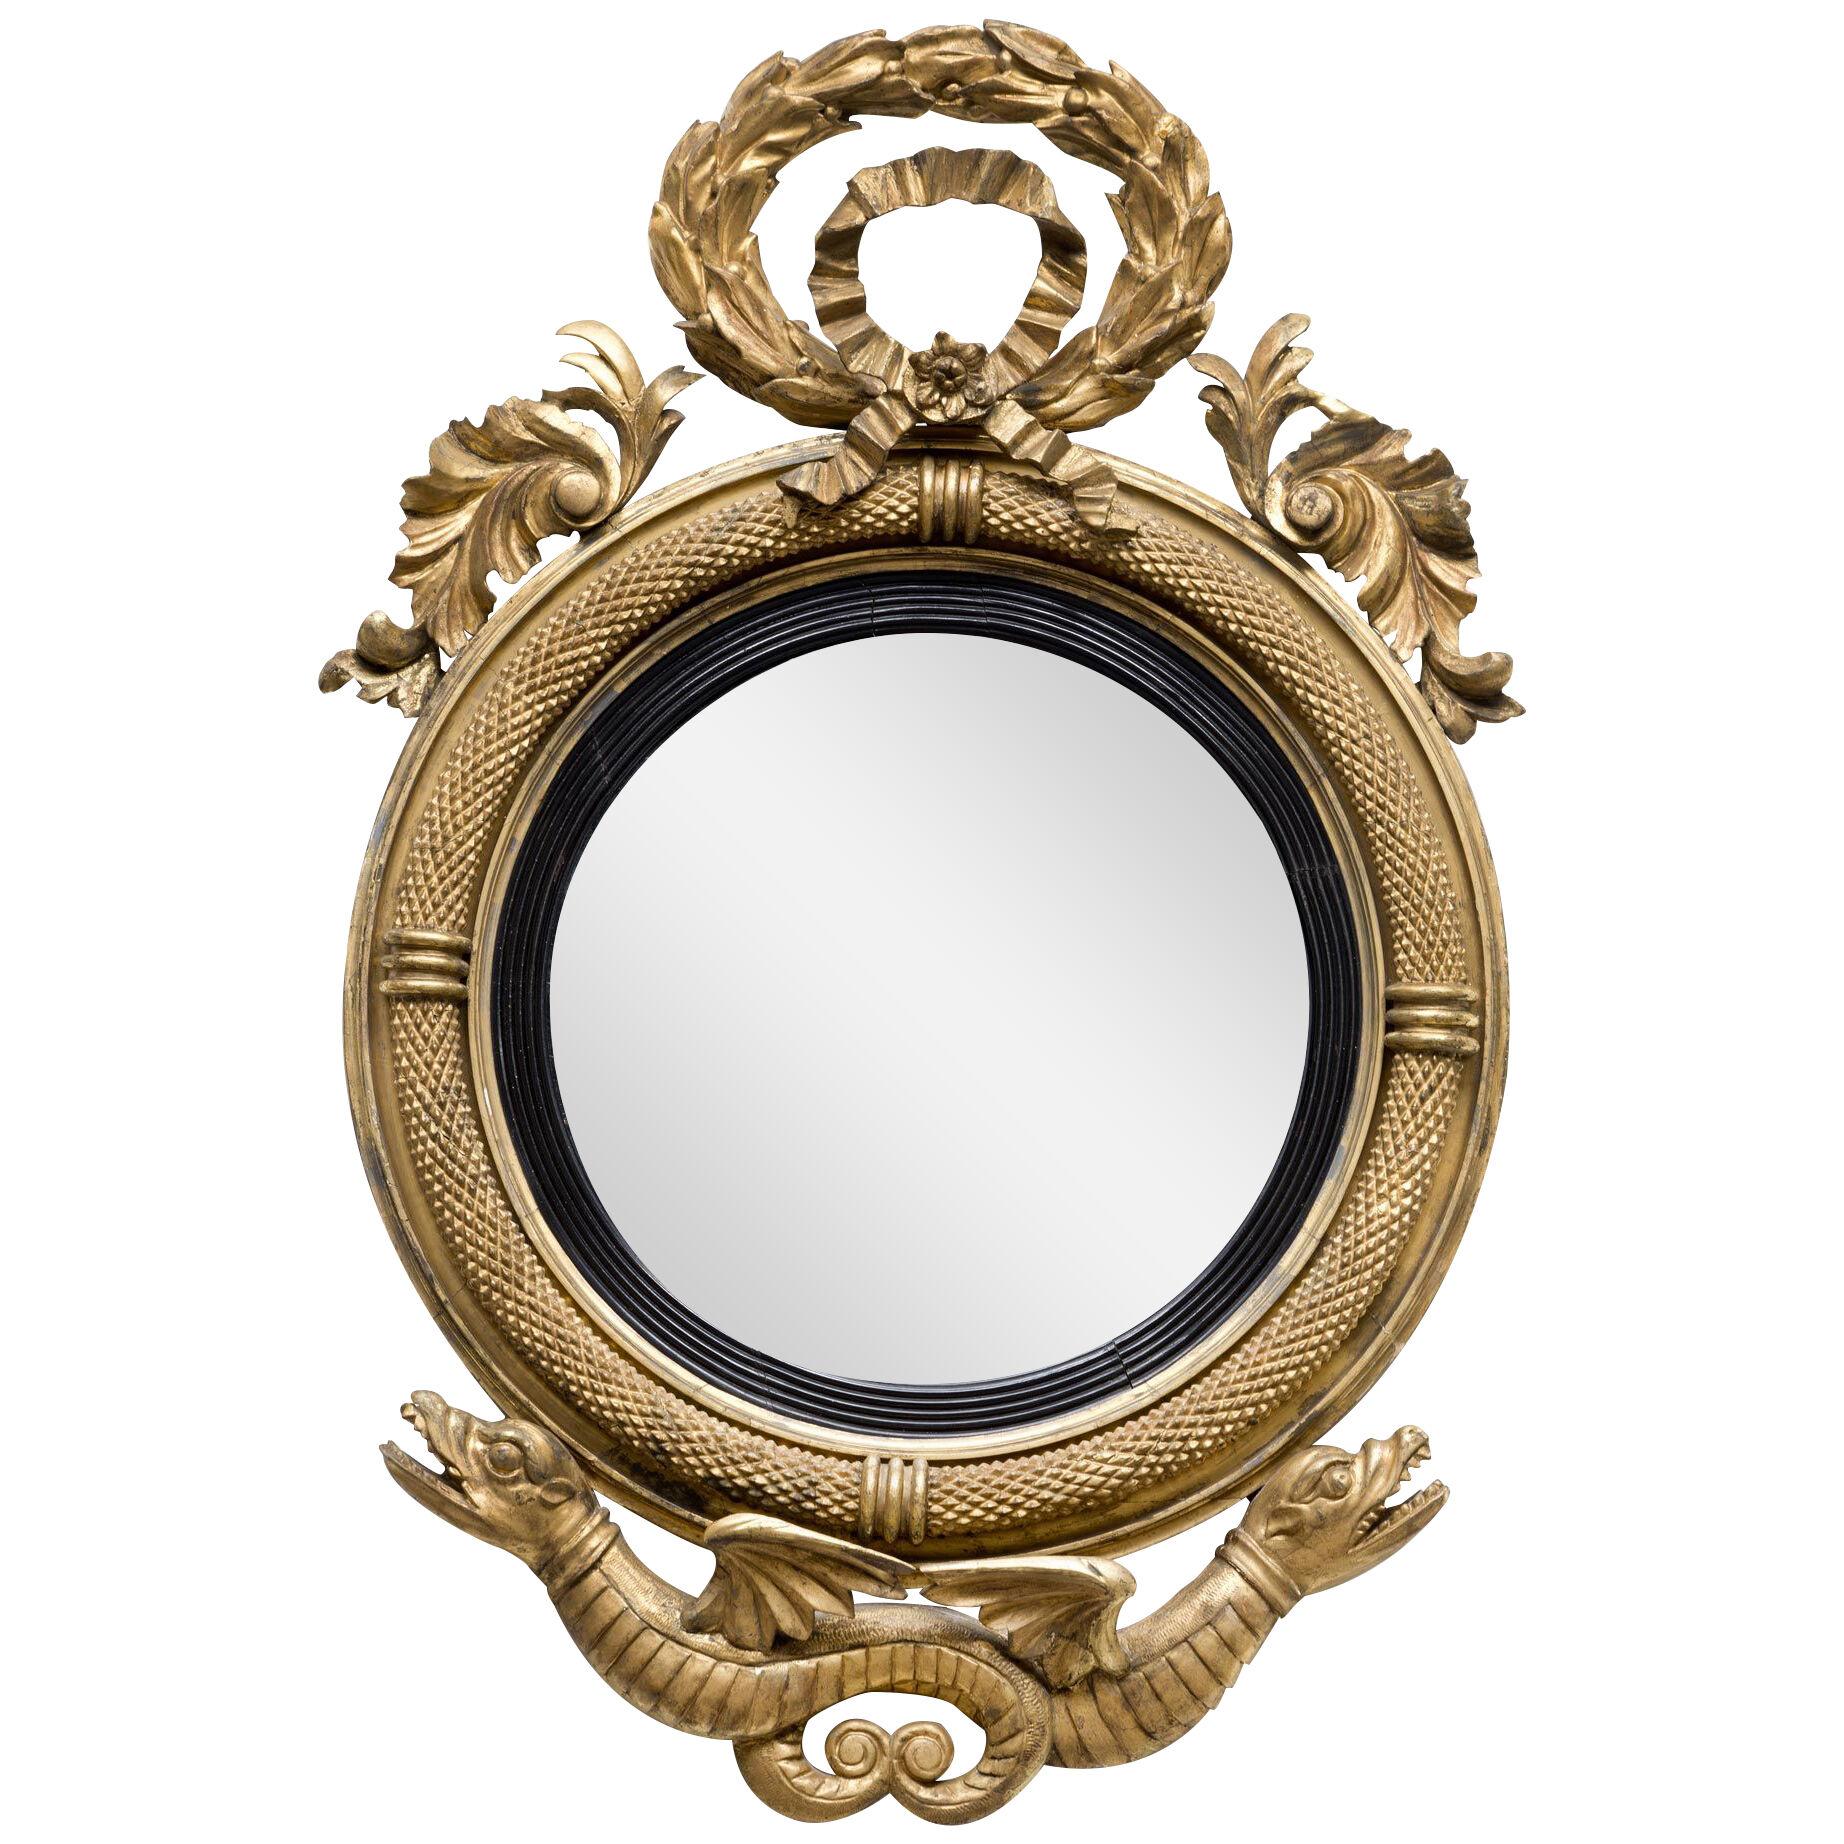 Period Federal Giltwood Convex Mirror with Hippocampus